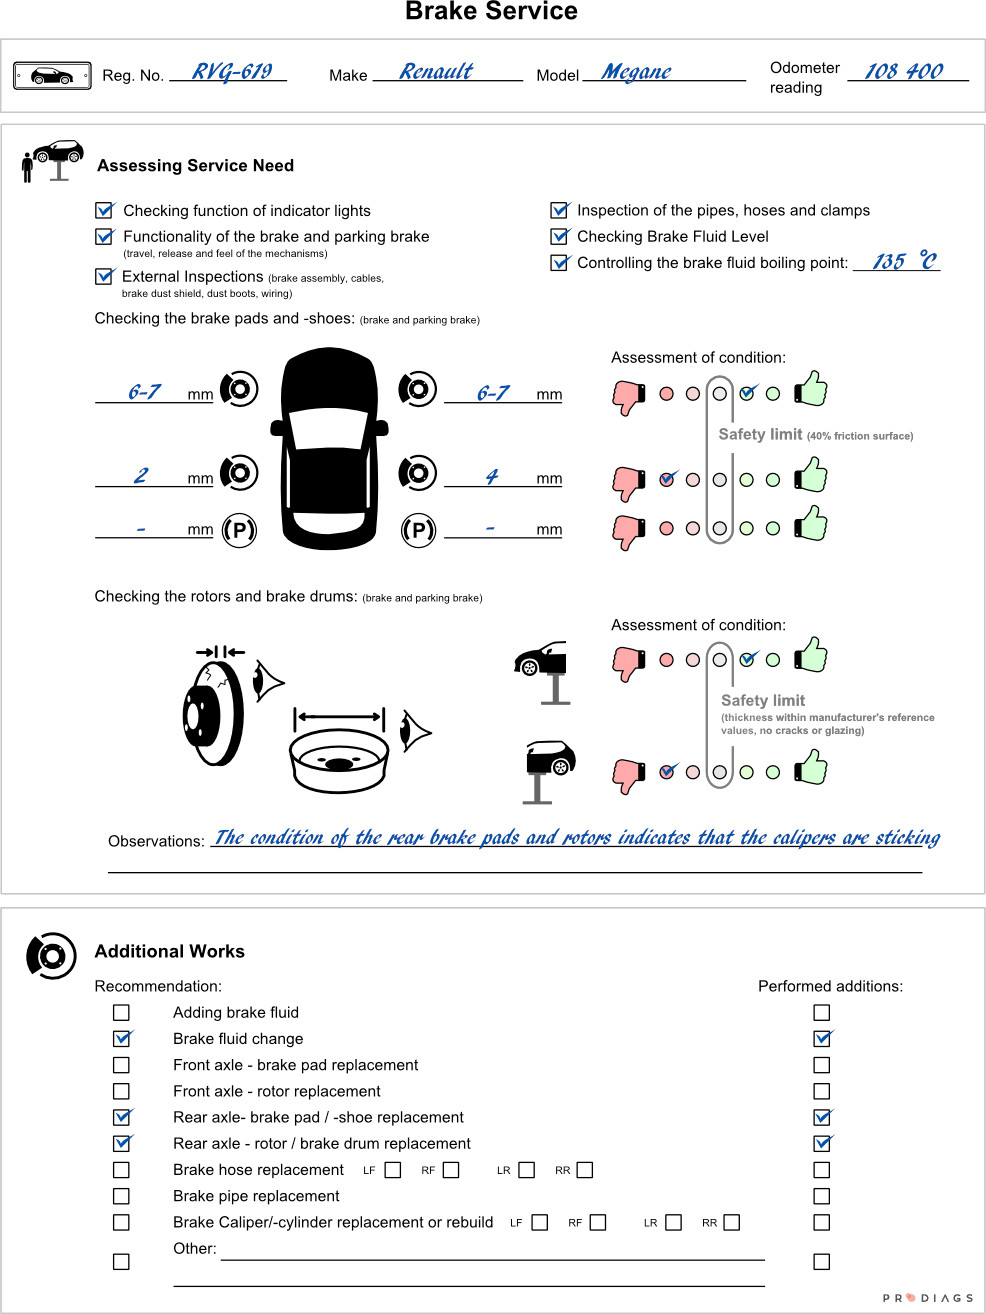 Learn how to inspect brakes and perform brake service correctly with this online training module. You will also get a printable form for brake inspection to ease your work and more easily explain the needed services and repairs to your customer.